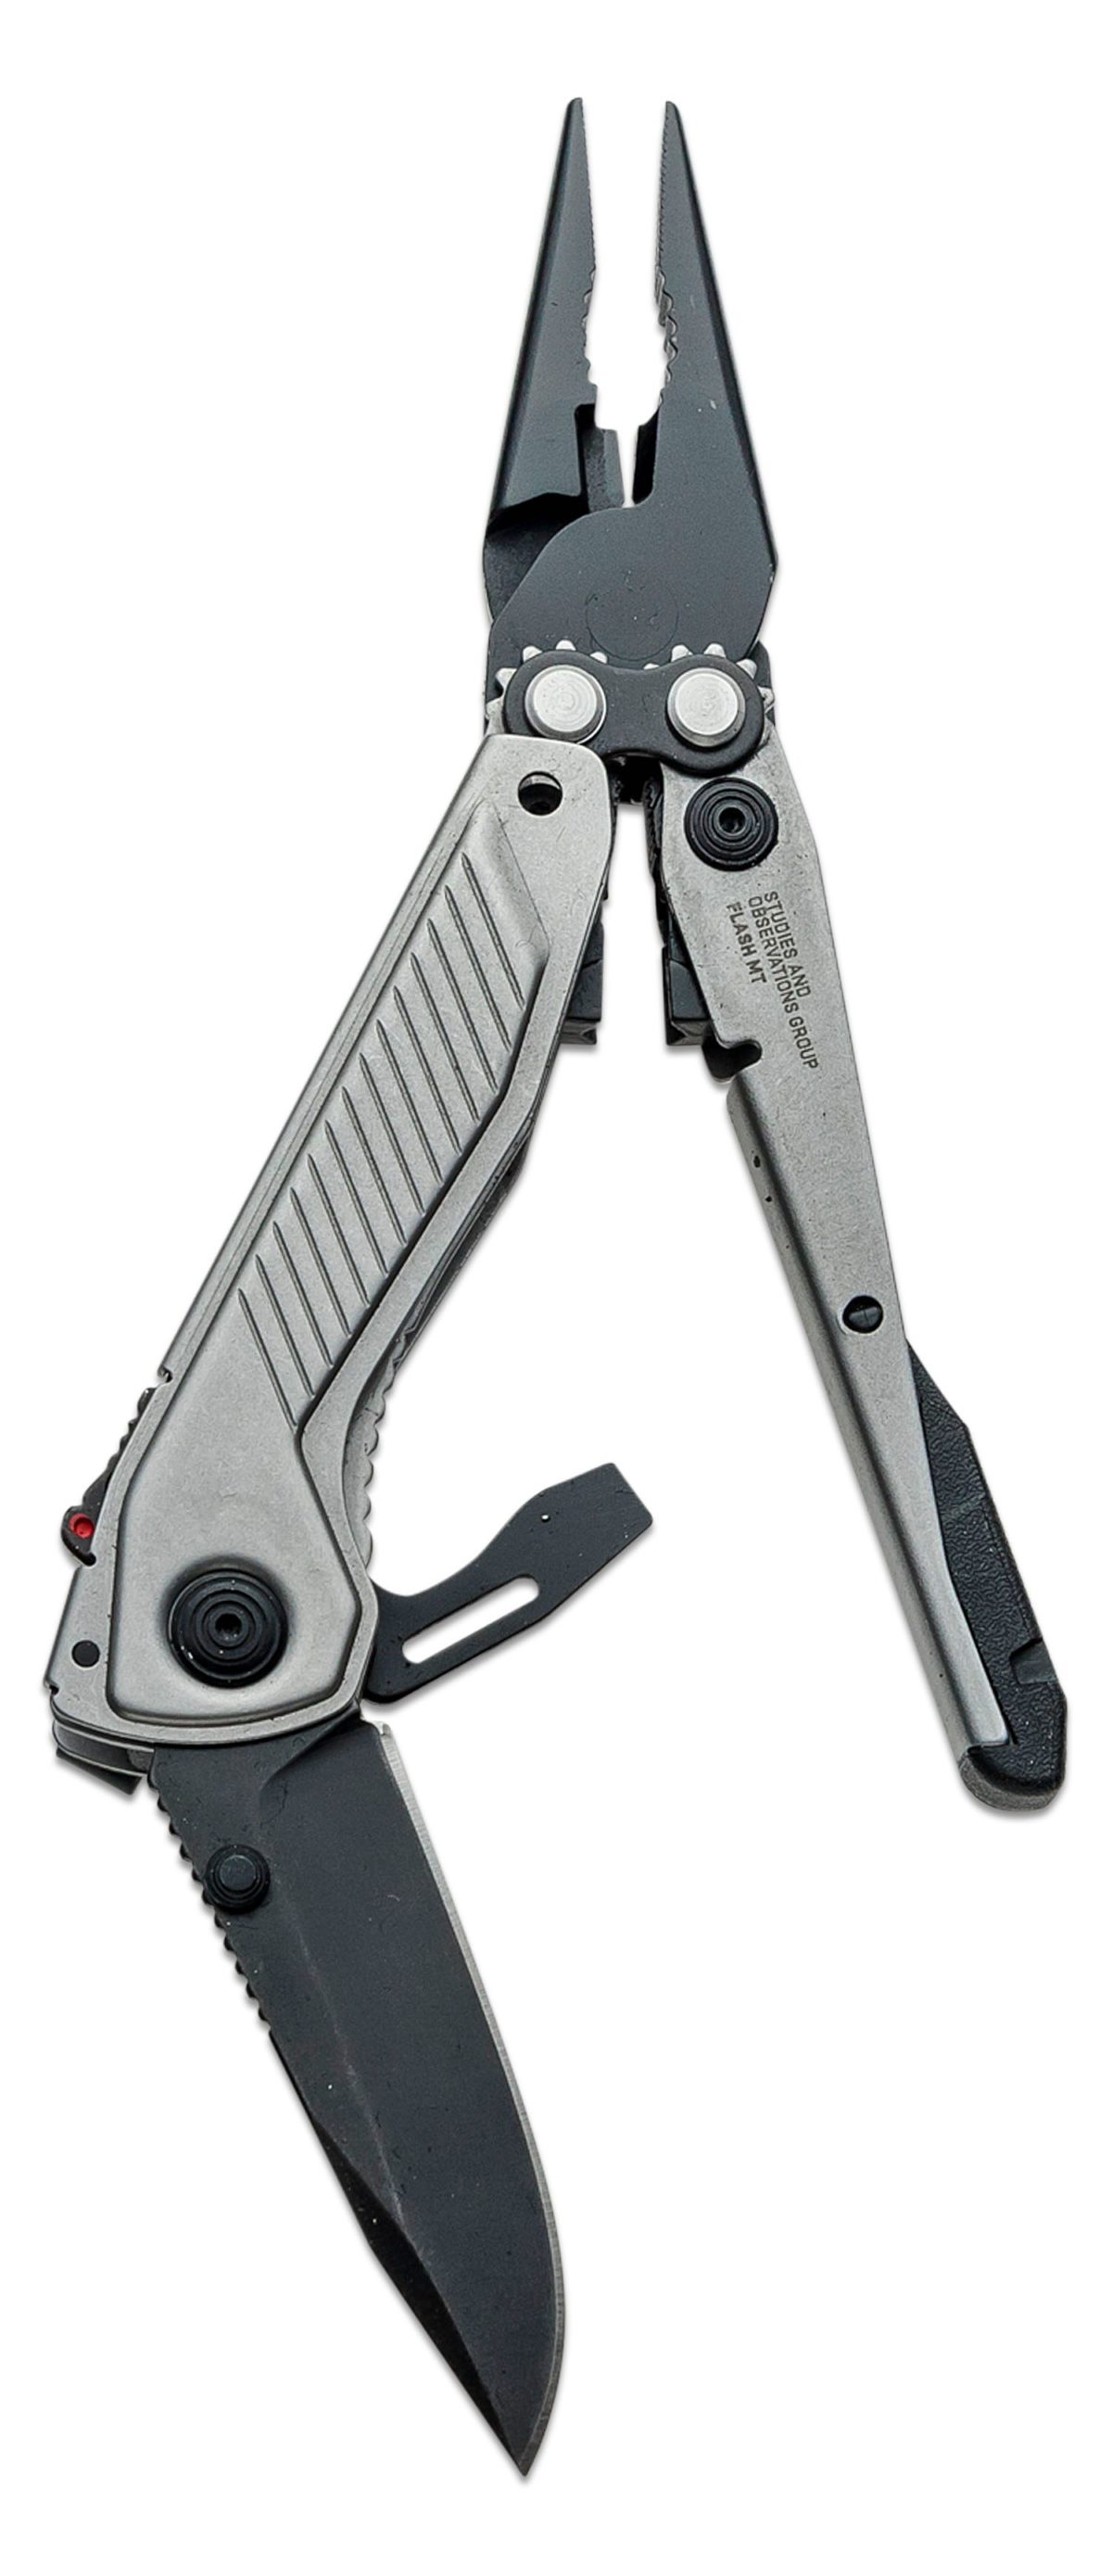 S.O.G. Silver Flash MT Multi-Tool with 7 Tools